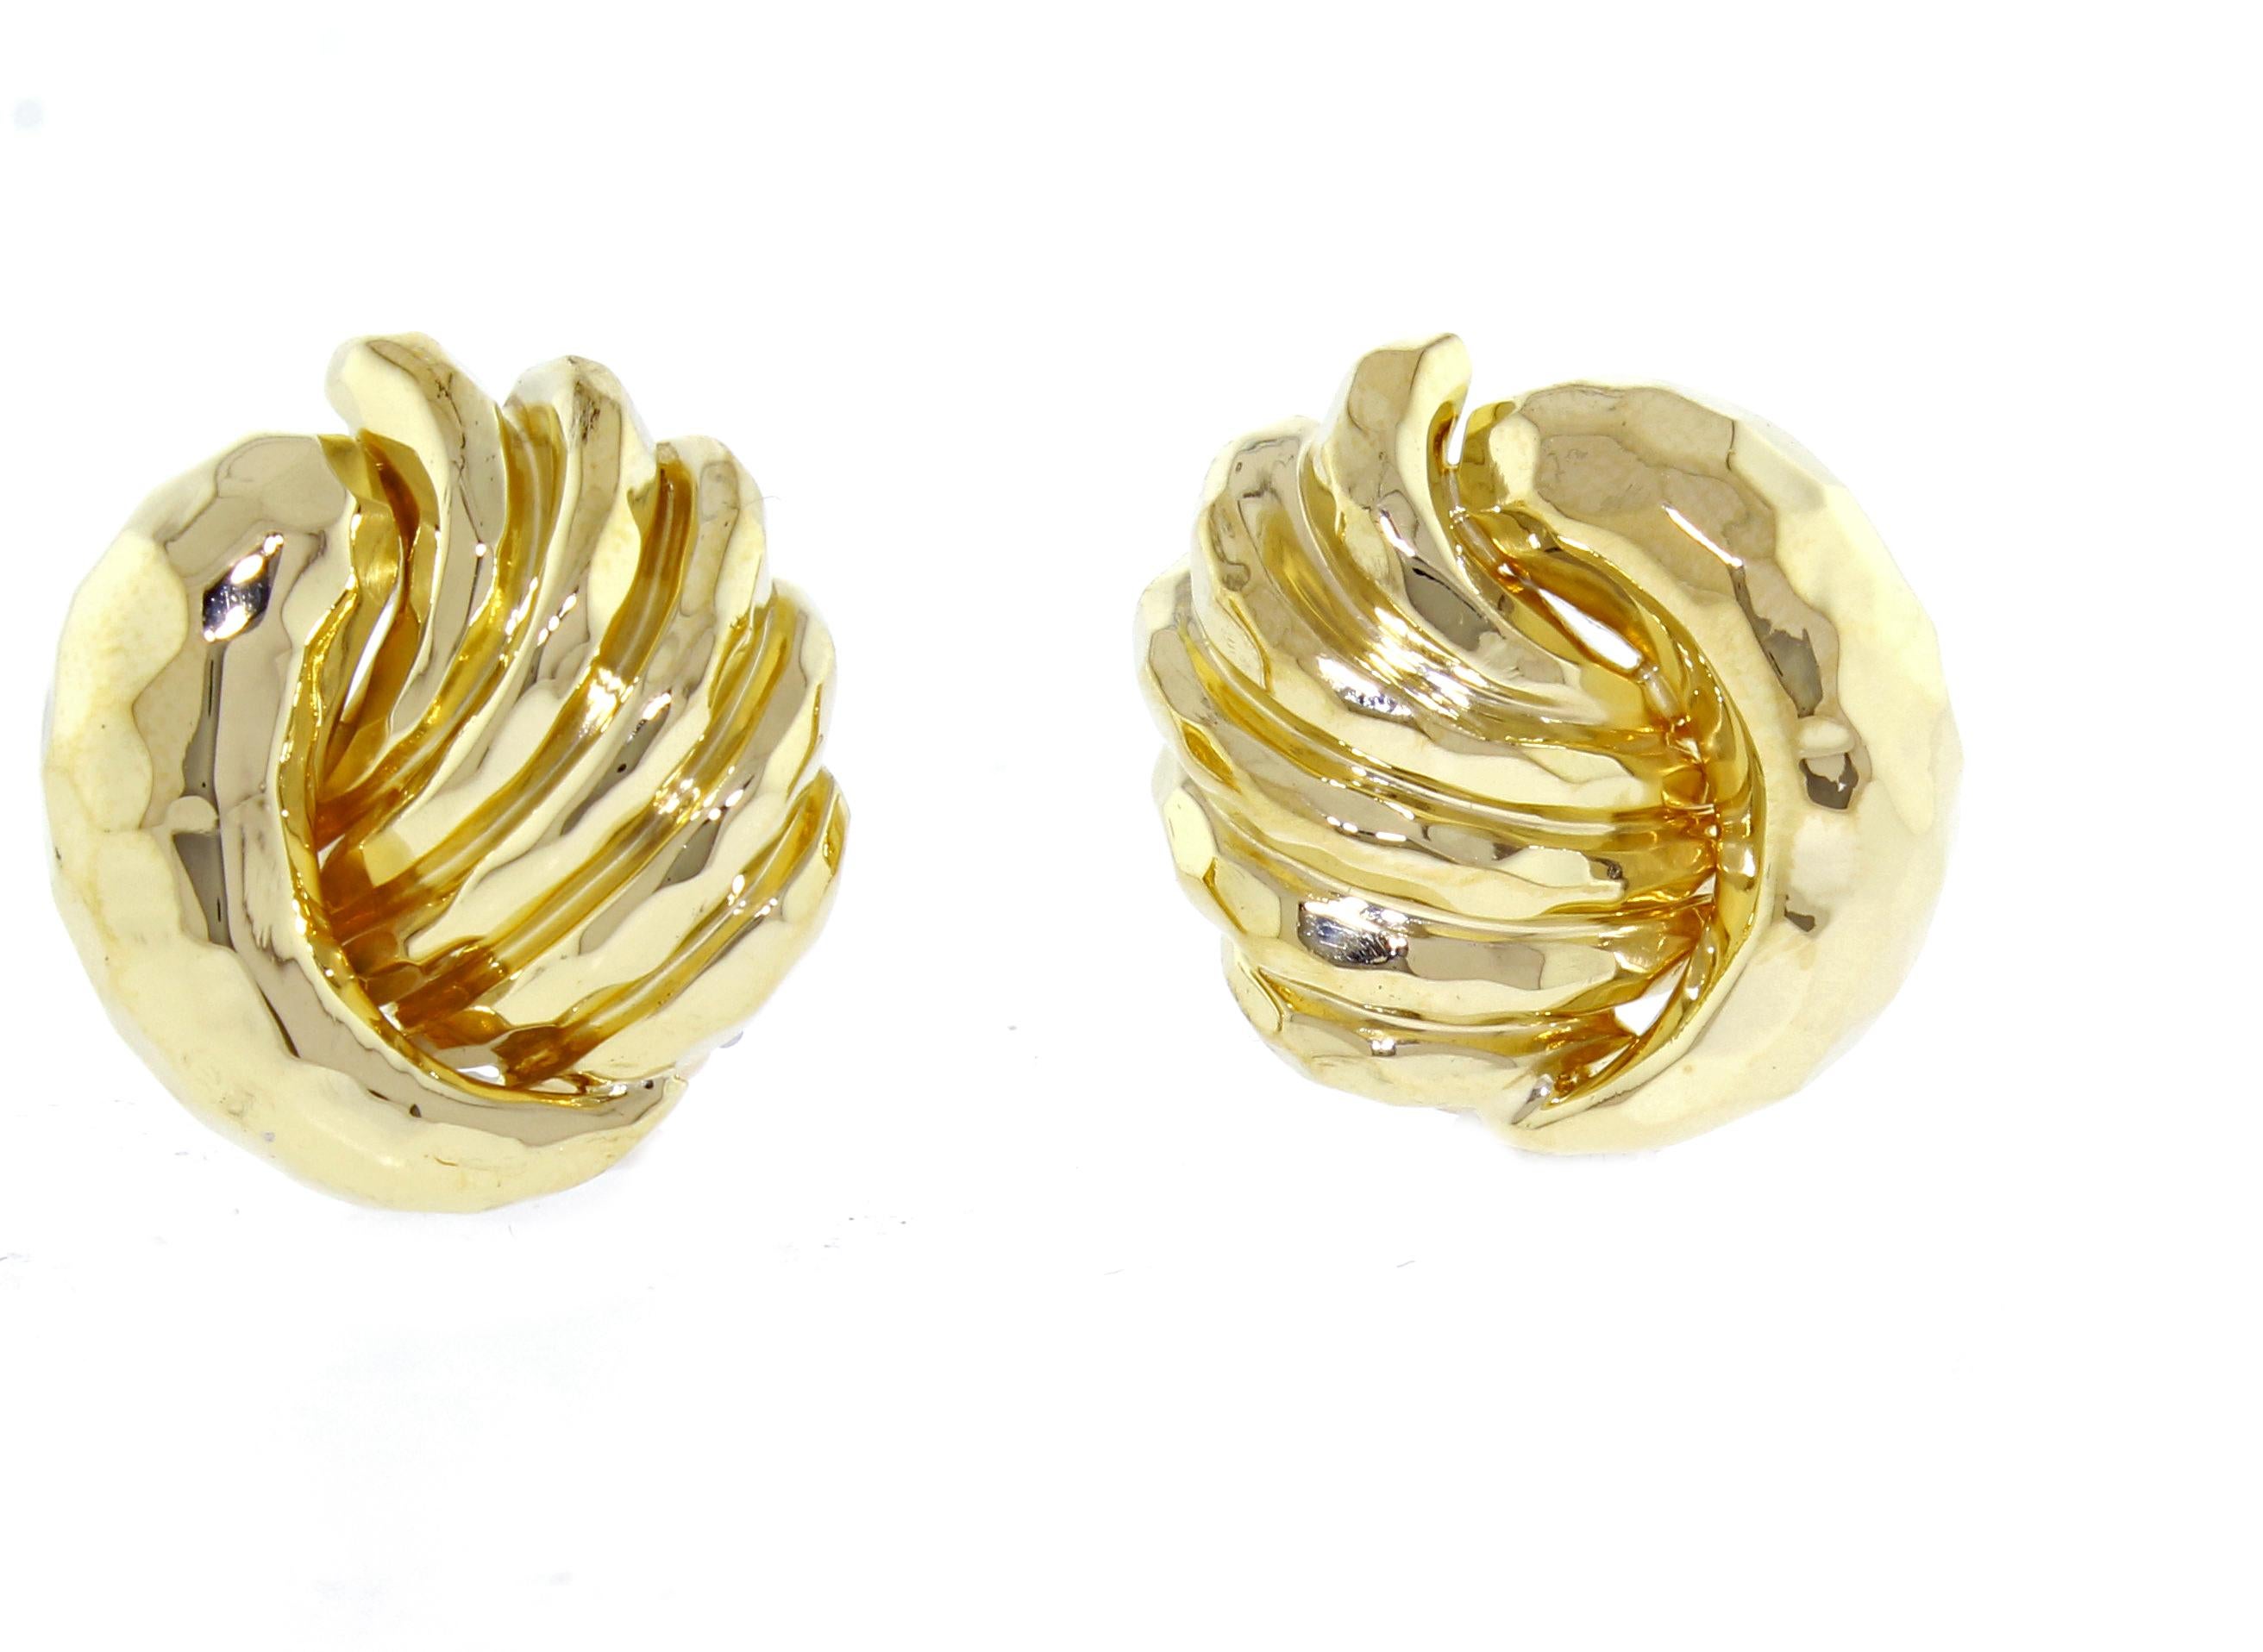 From award winning designer Henry Dunay, a a pair of 18 karat gold earrings. The earring feature Dunay's signature hammerers finish. 23 grams  22mm X 21mm clip backs, post maybe added id desires